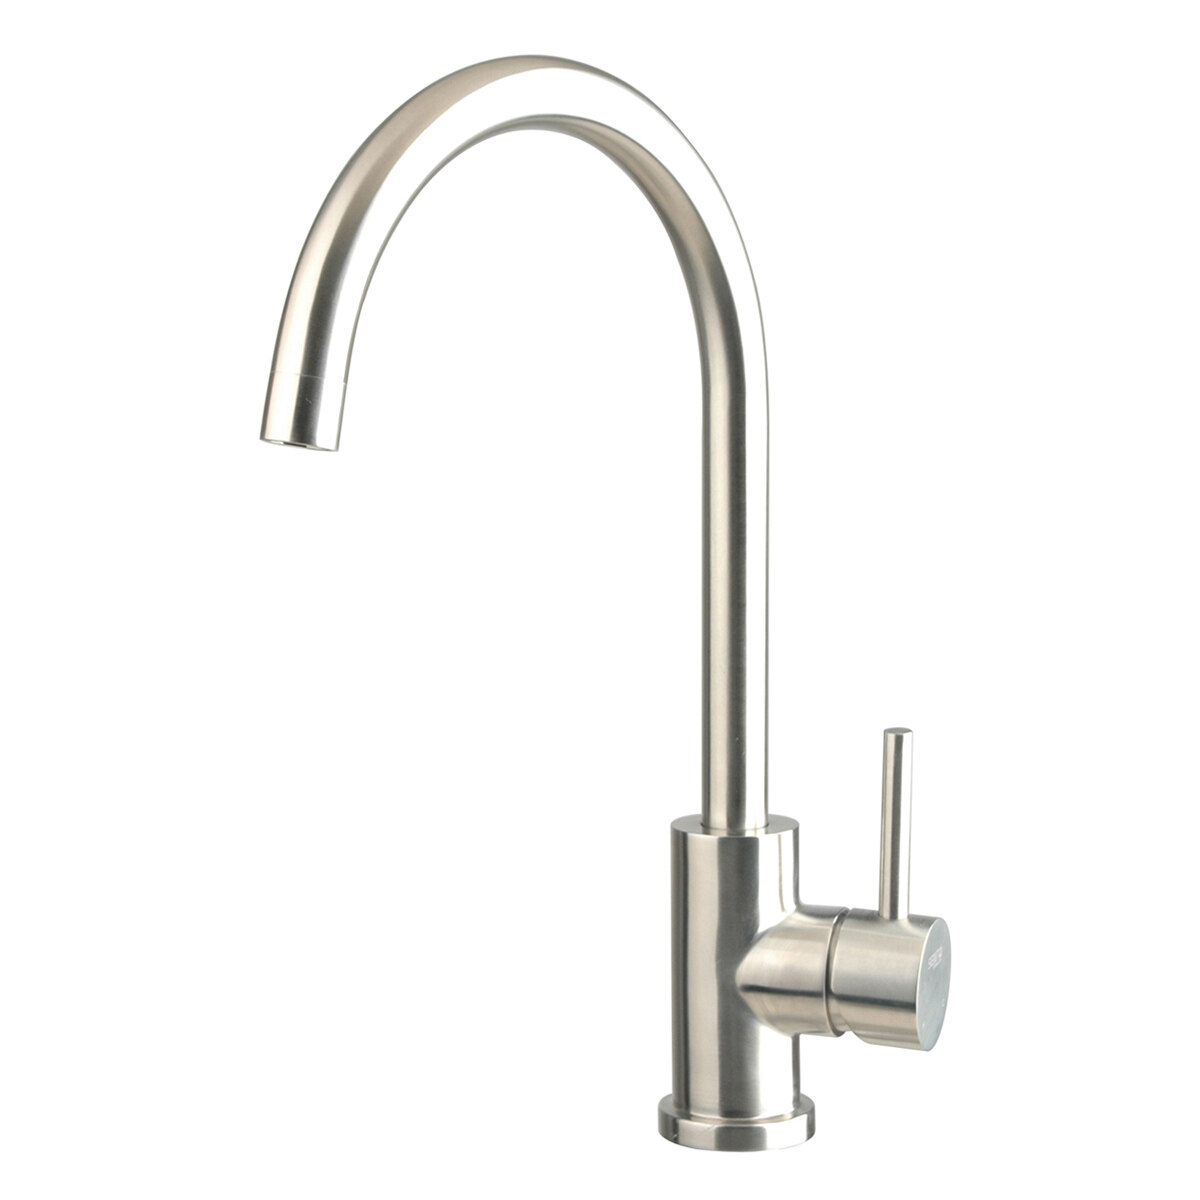 Nsf Water Saver Faucet Company Sus 304 316 Stainless Steel High Quality Kitchen Sink Faucet Tap Sprayer Mixer